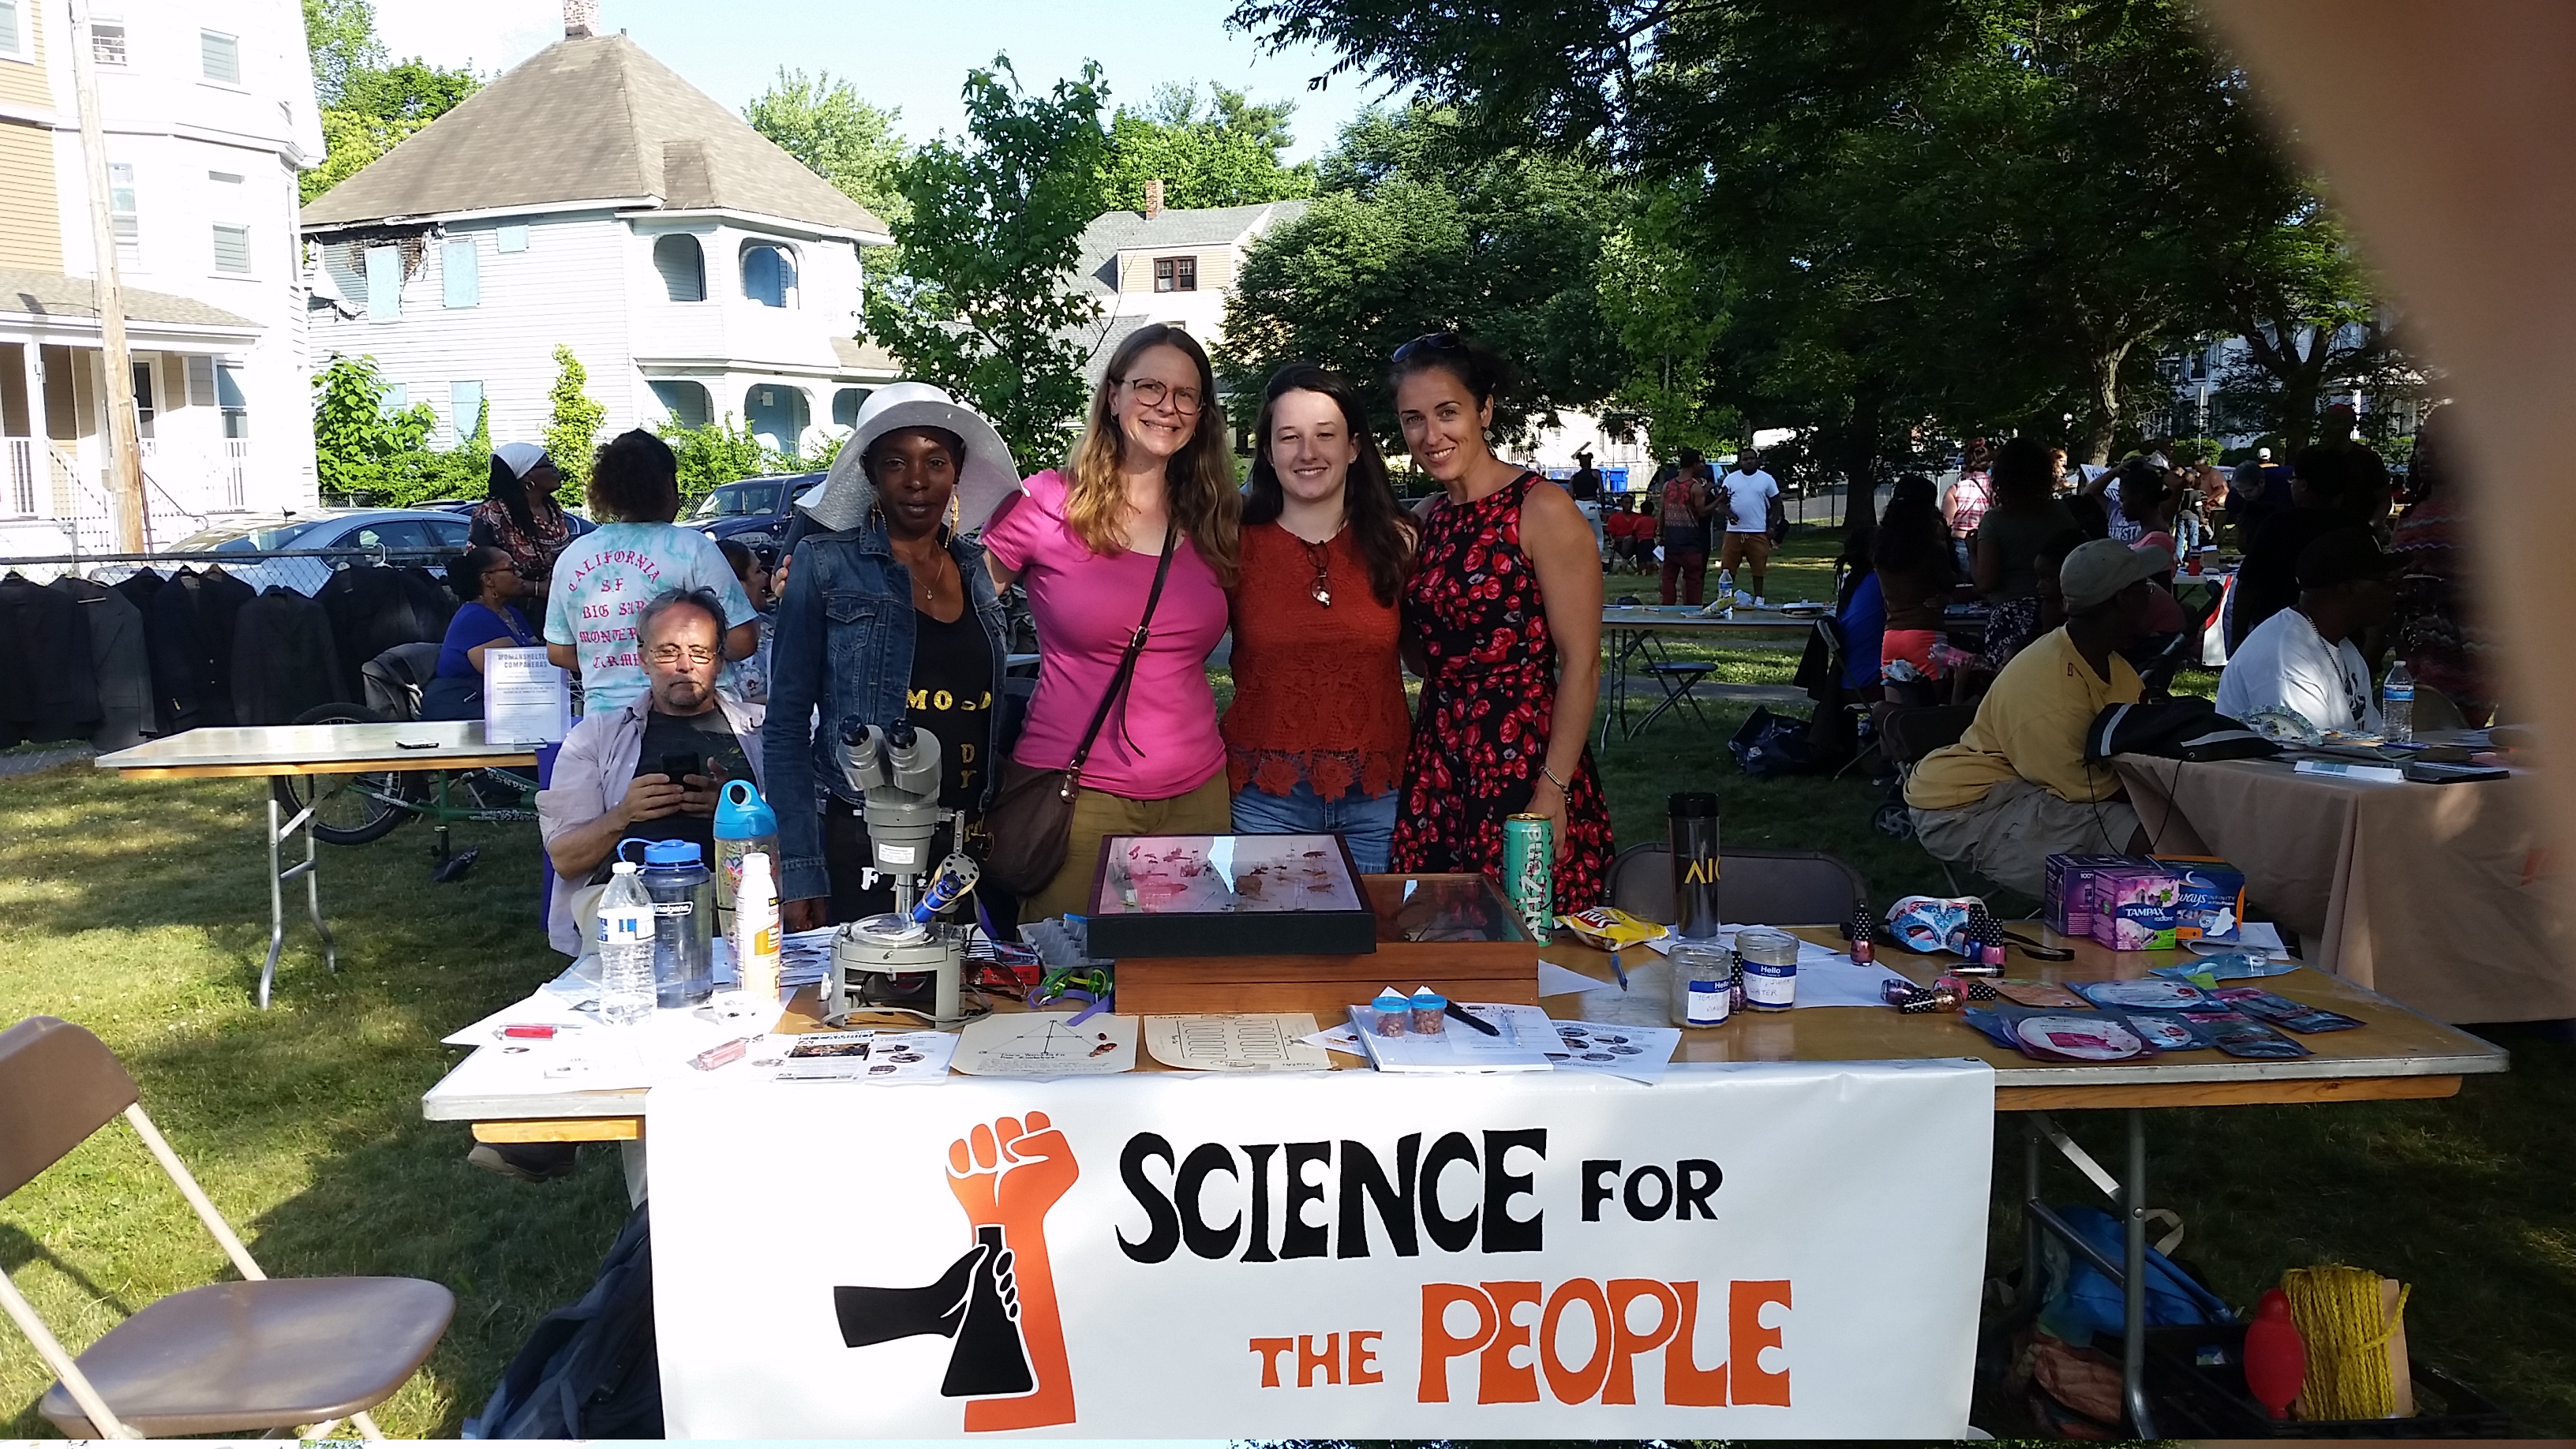 Members of Western Mass Science for the People in Hennessey Park (Springfield, Massachusetts) participate alongside Arise for Social Justice in a Juneteenth Celebration